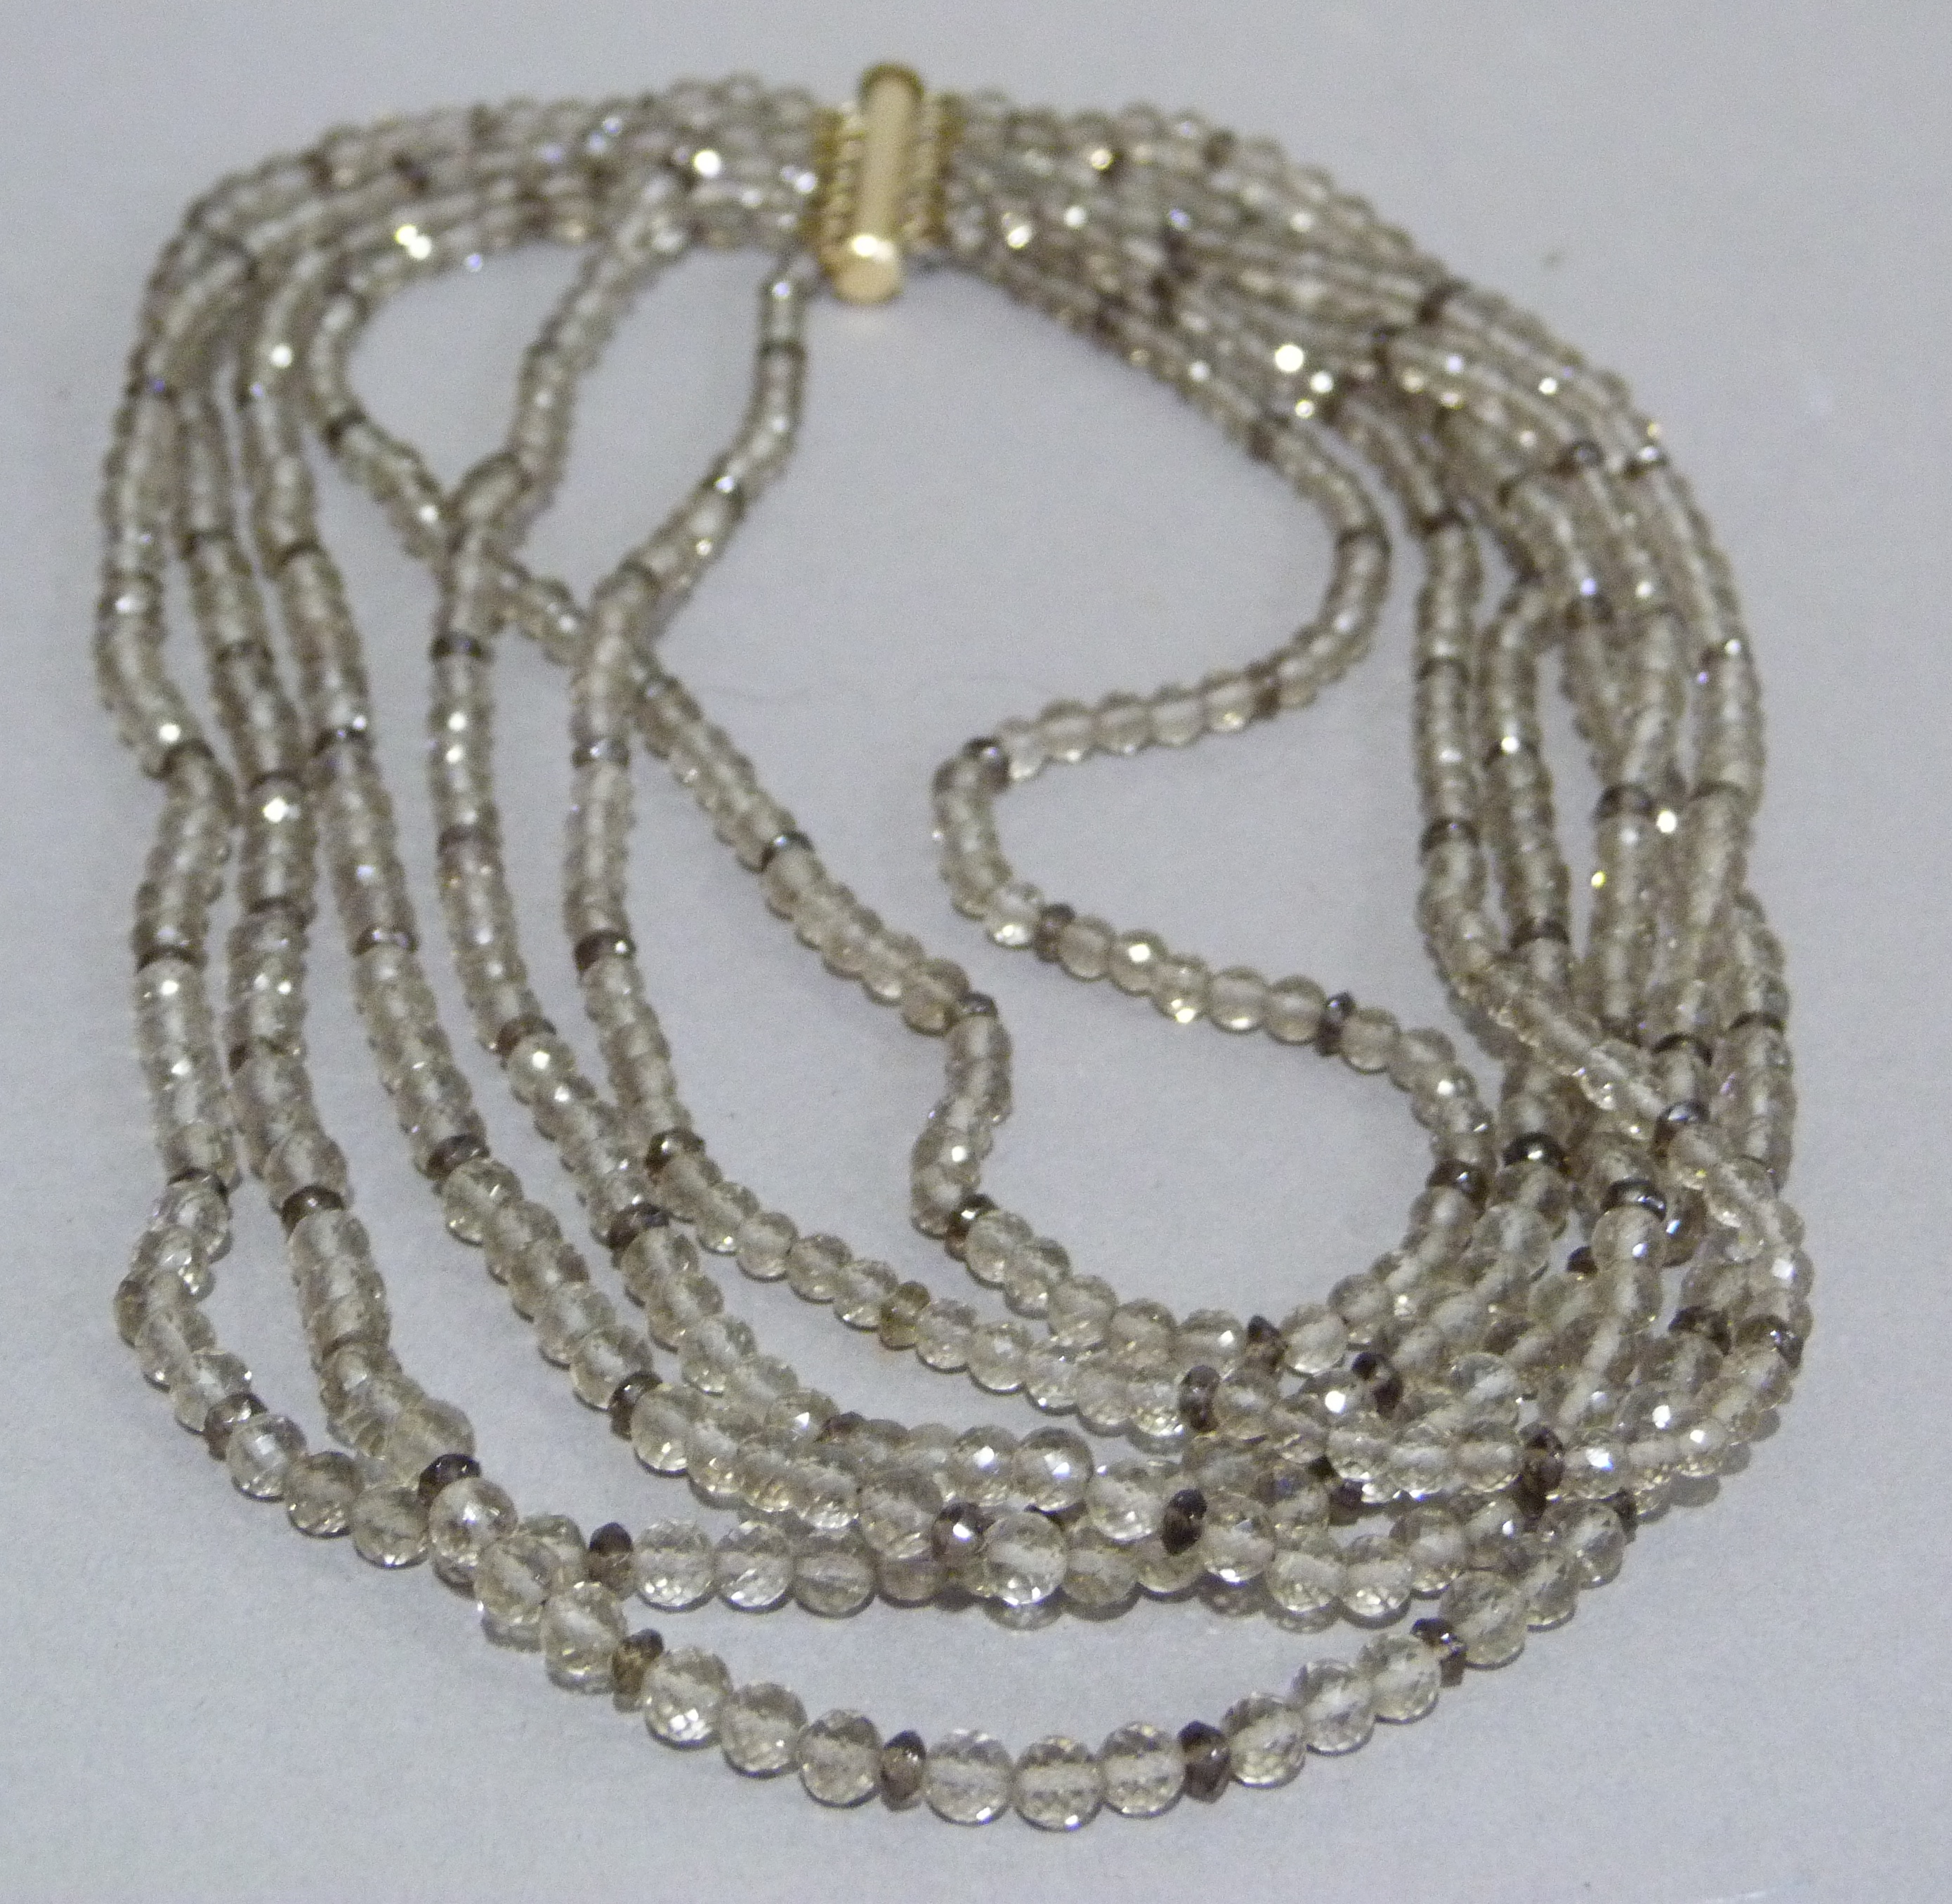 A multi strand necklace of graduated facetted smoky quartz beads with rolled gold fittings, - Image 2 of 3